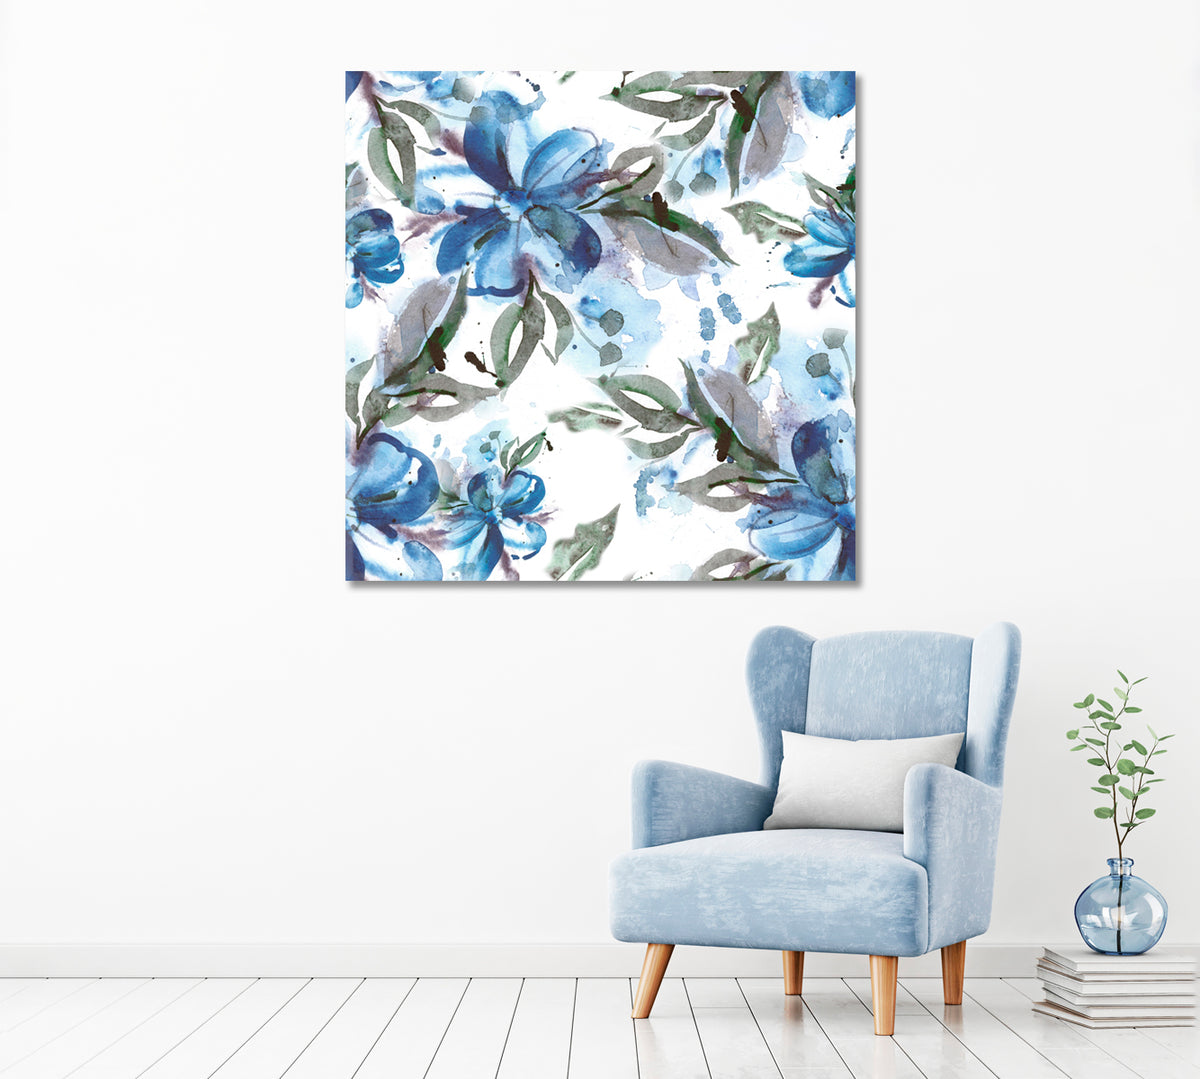 Blue Watercolor Flowers Canvas Print ArtLexy 1 Panel 12"x12" inches 